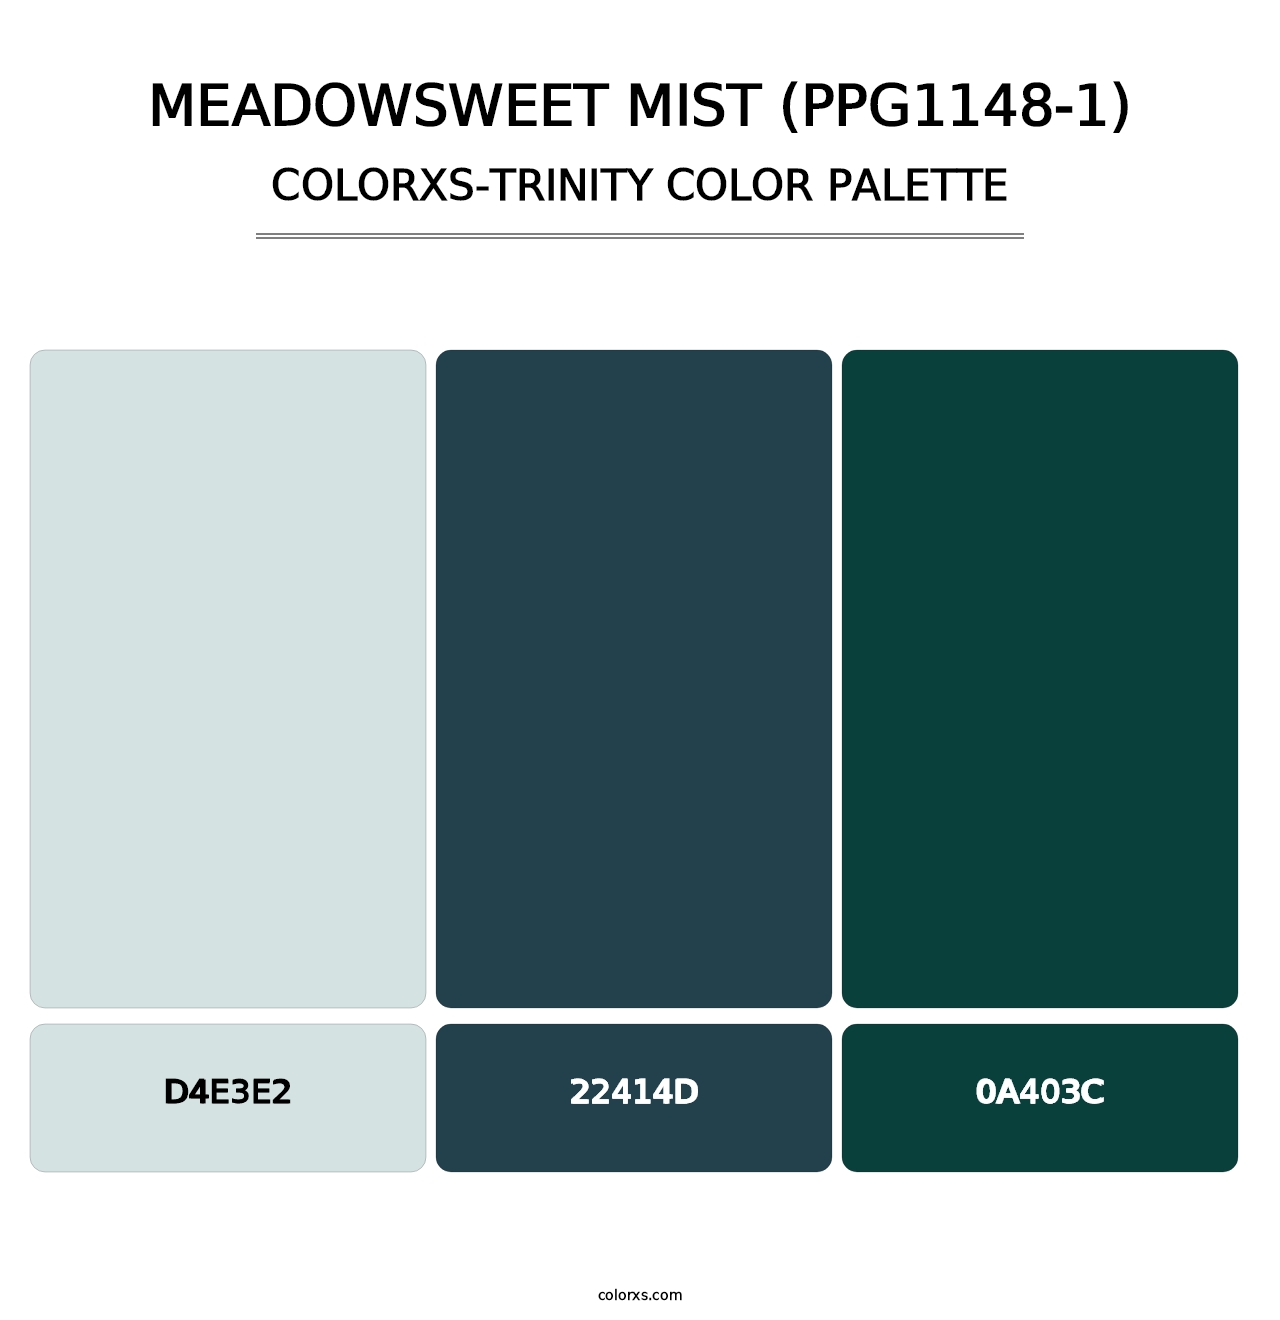 Meadowsweet Mist (PPG1148-1) - Colorxs Trinity Palette